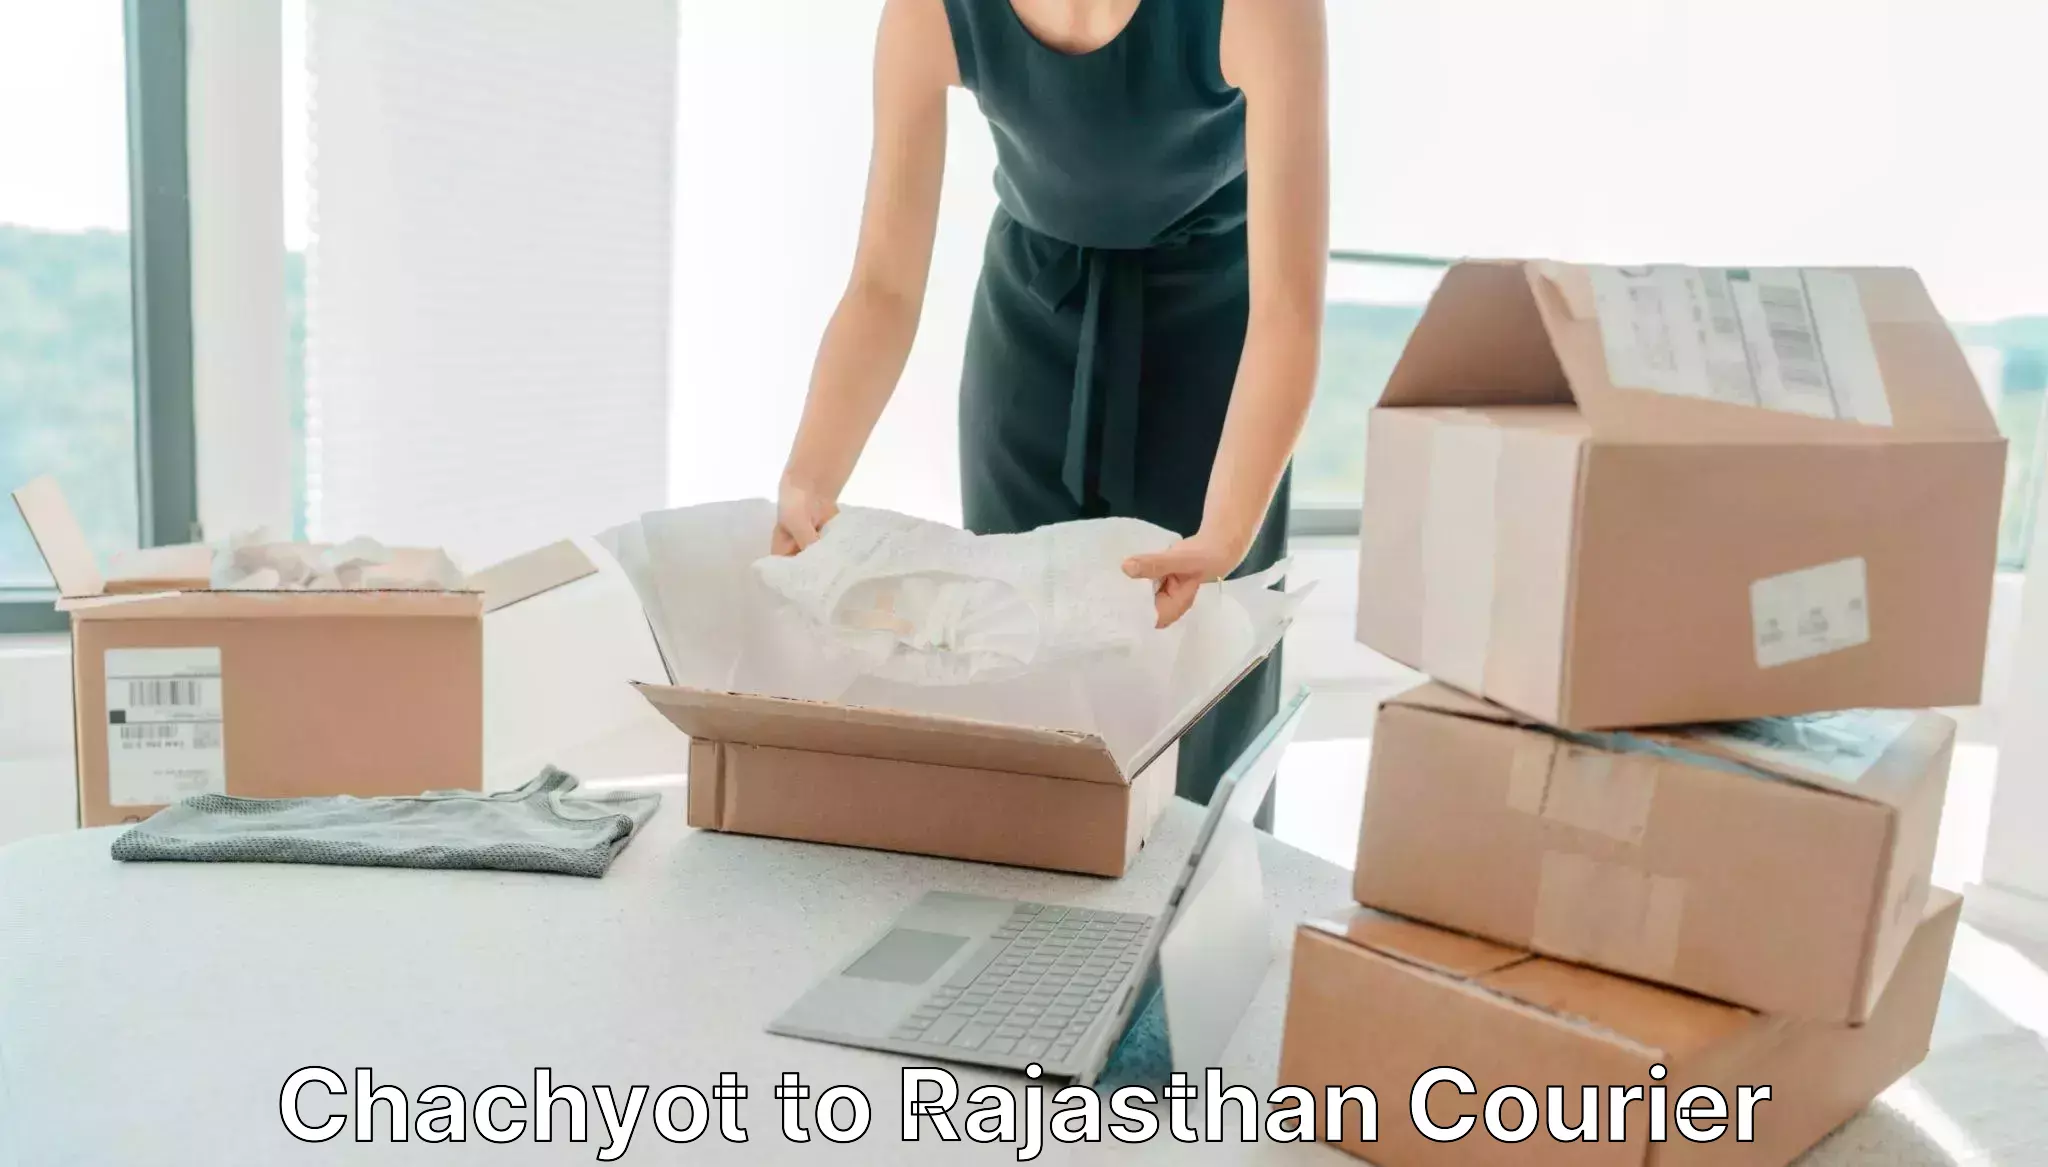 Trackable shipping service Chachyot to Tibbi